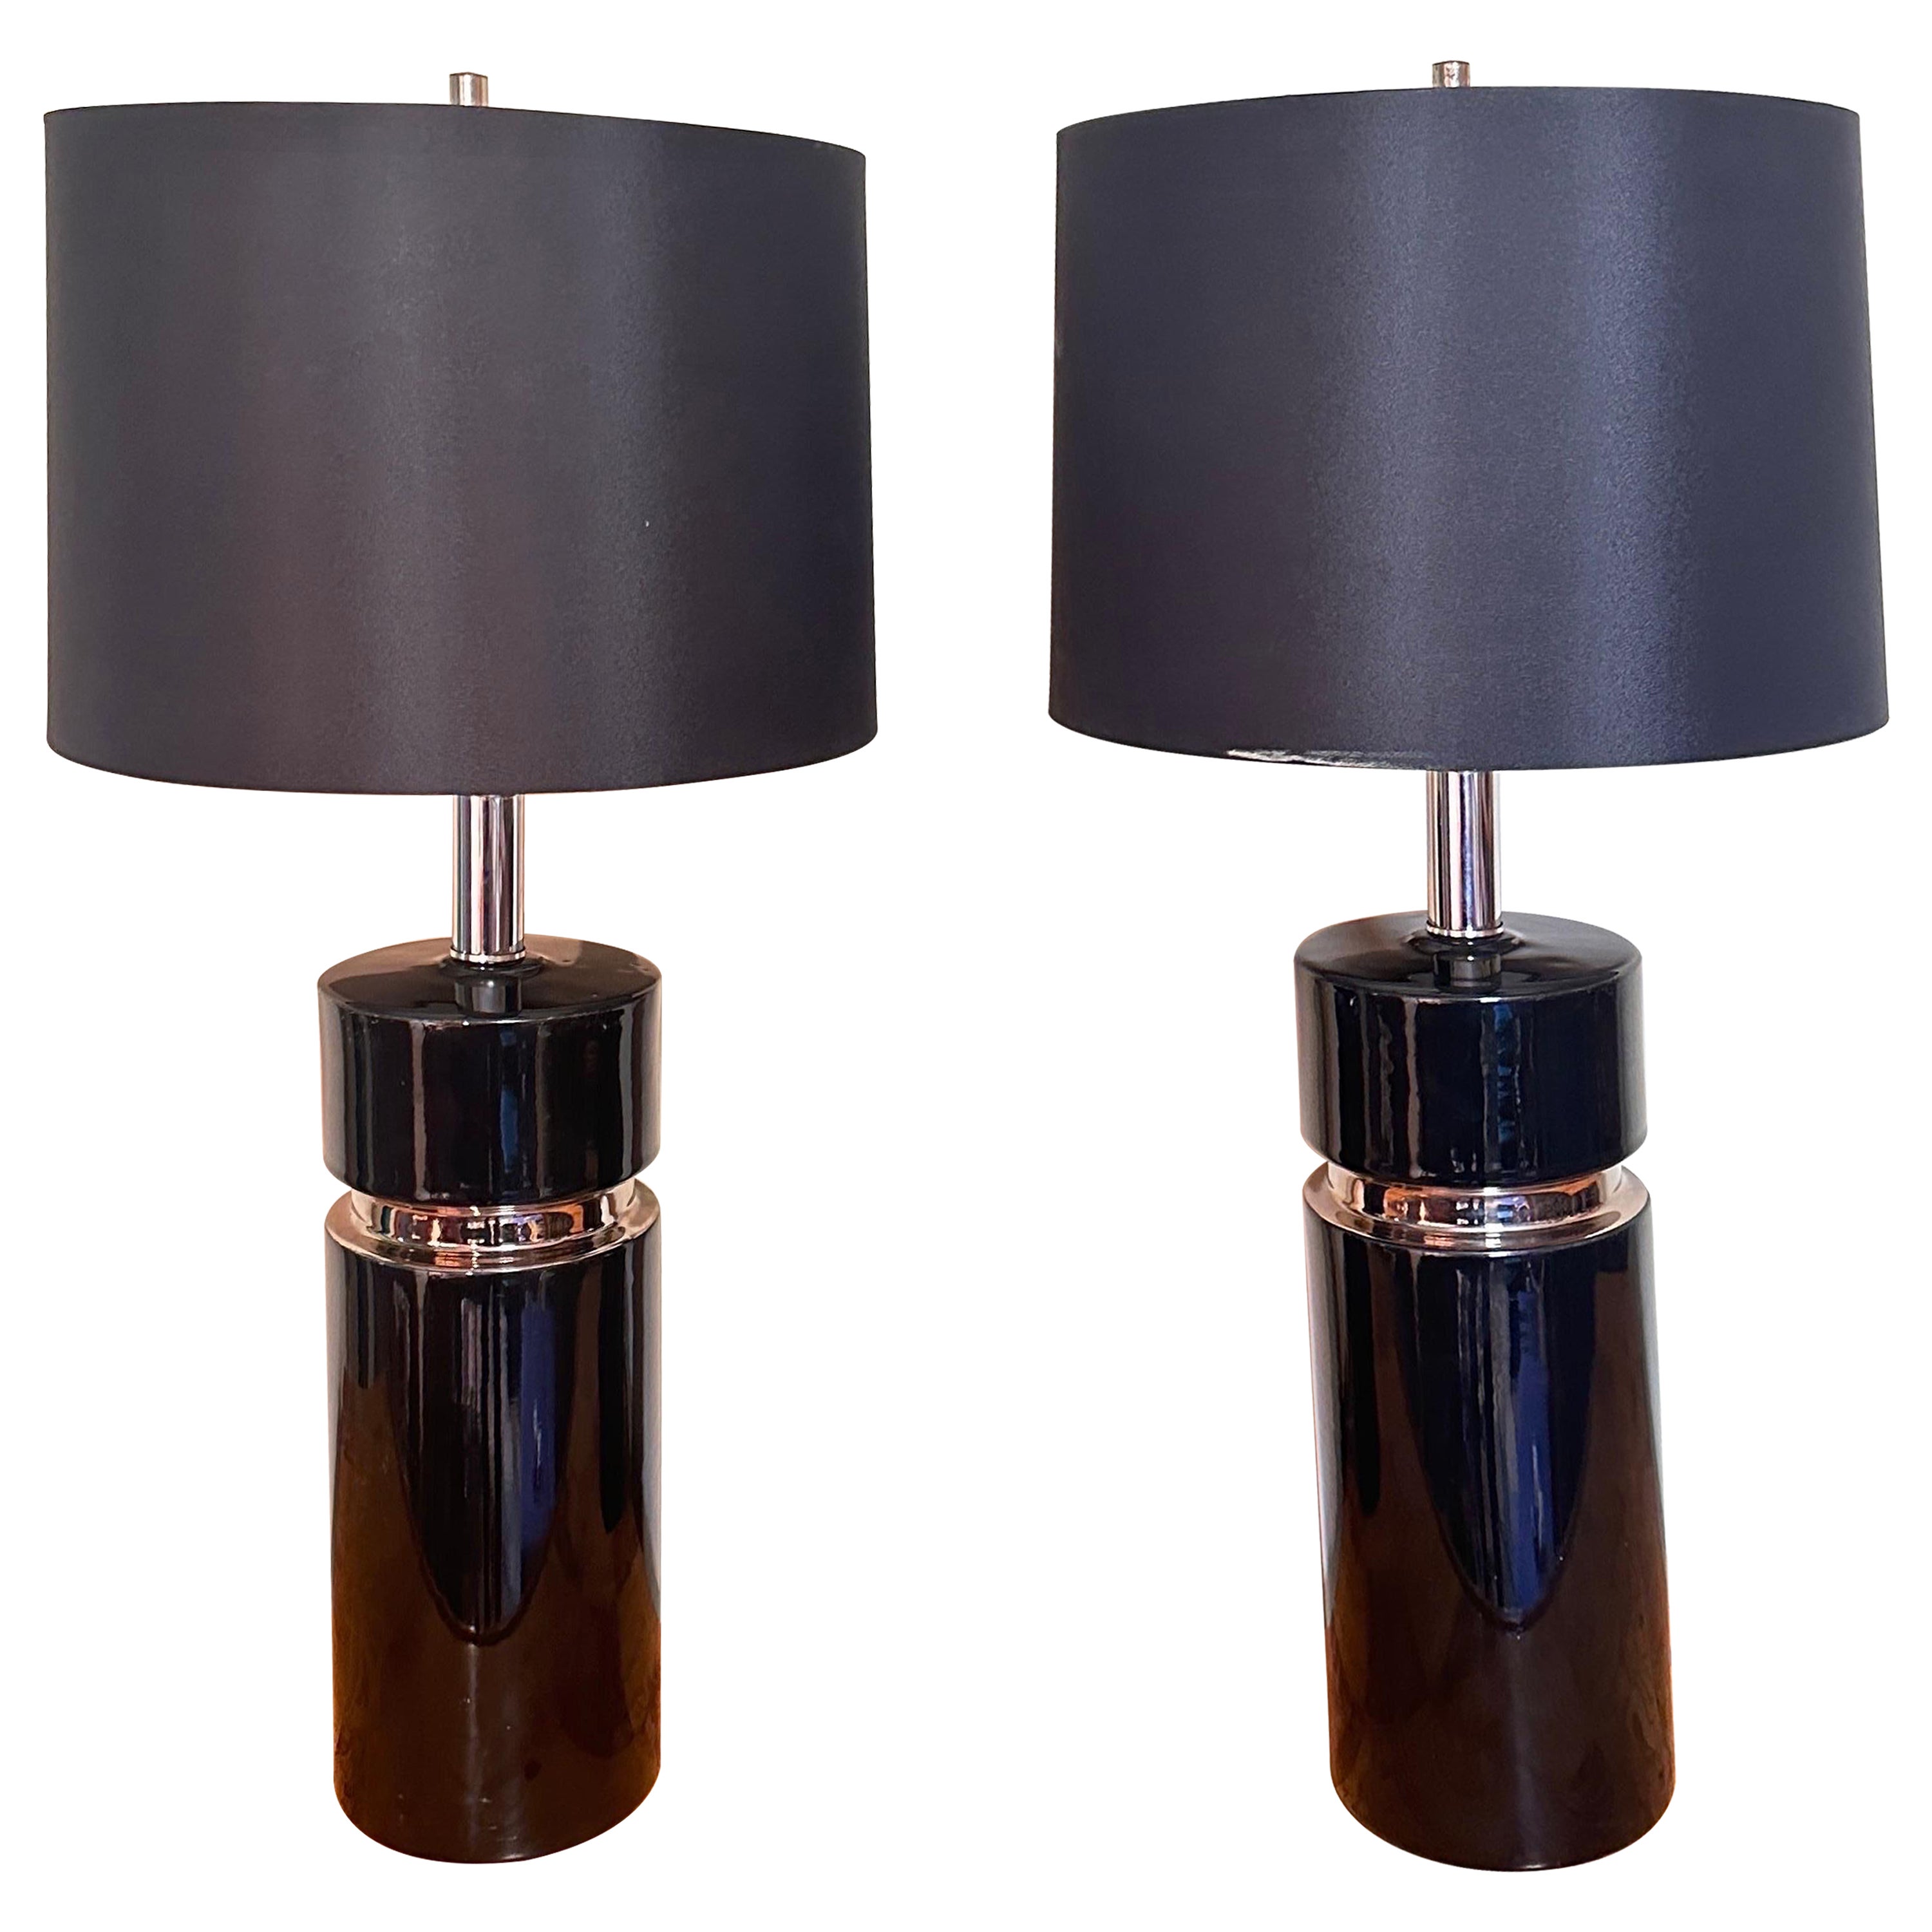 1960s Italian Lamps in the Manner of Pierre Cardin Black and Chrome Bitossi Era For Sale